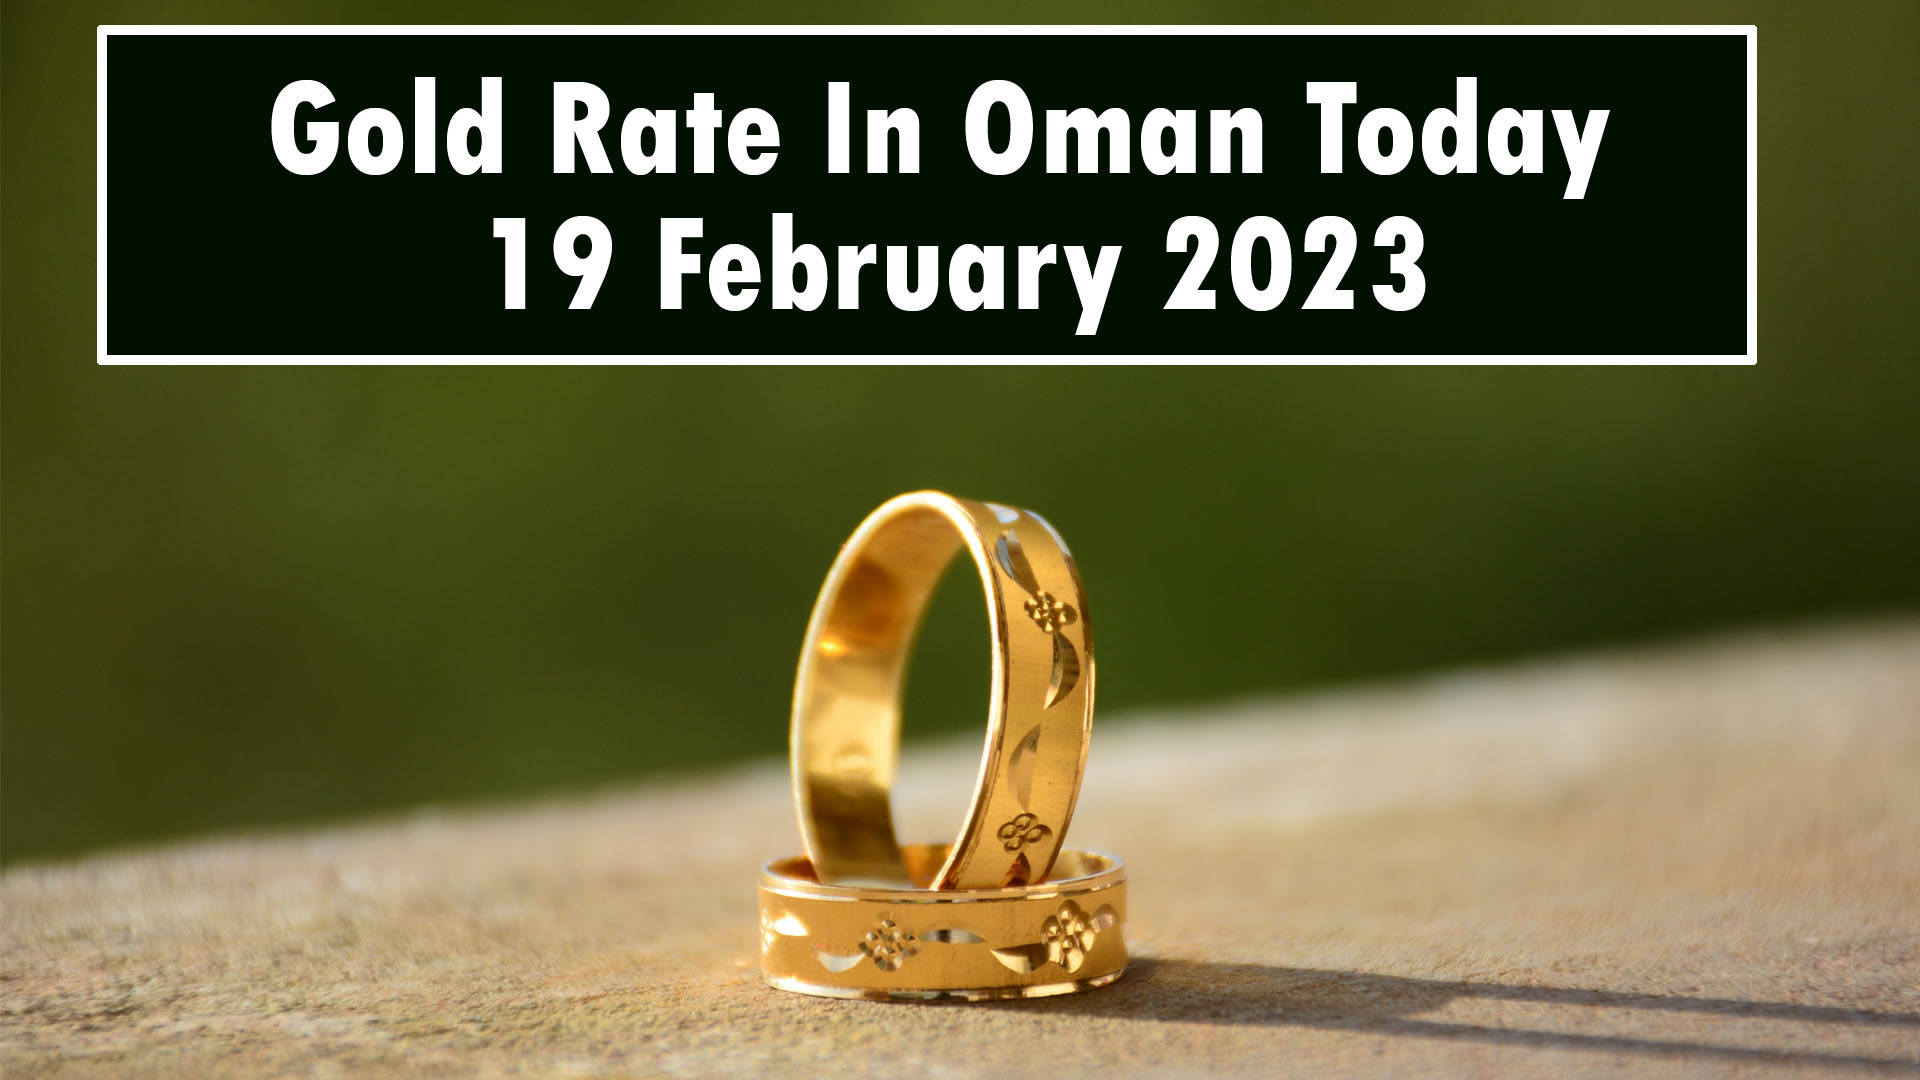 Gold Rate In Oman Today 19 February 2023